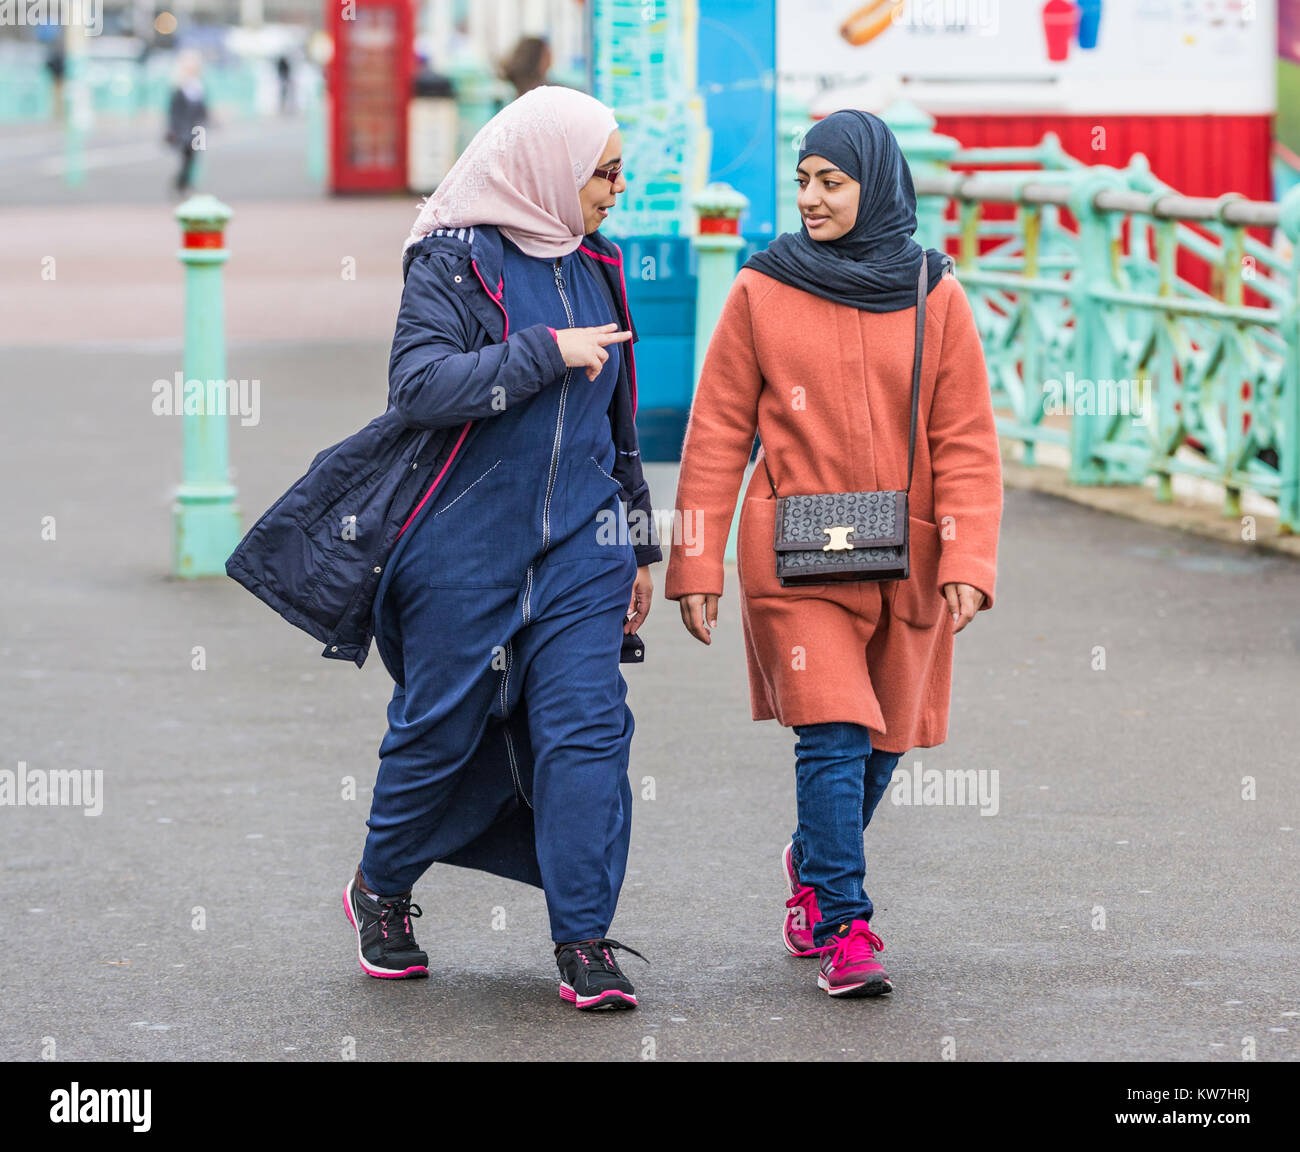 Pair of woman, likely Muslim due to clothing, wearing a hijab walking while speaking in Brighton, East Sussex, England, UK. Stock Photo